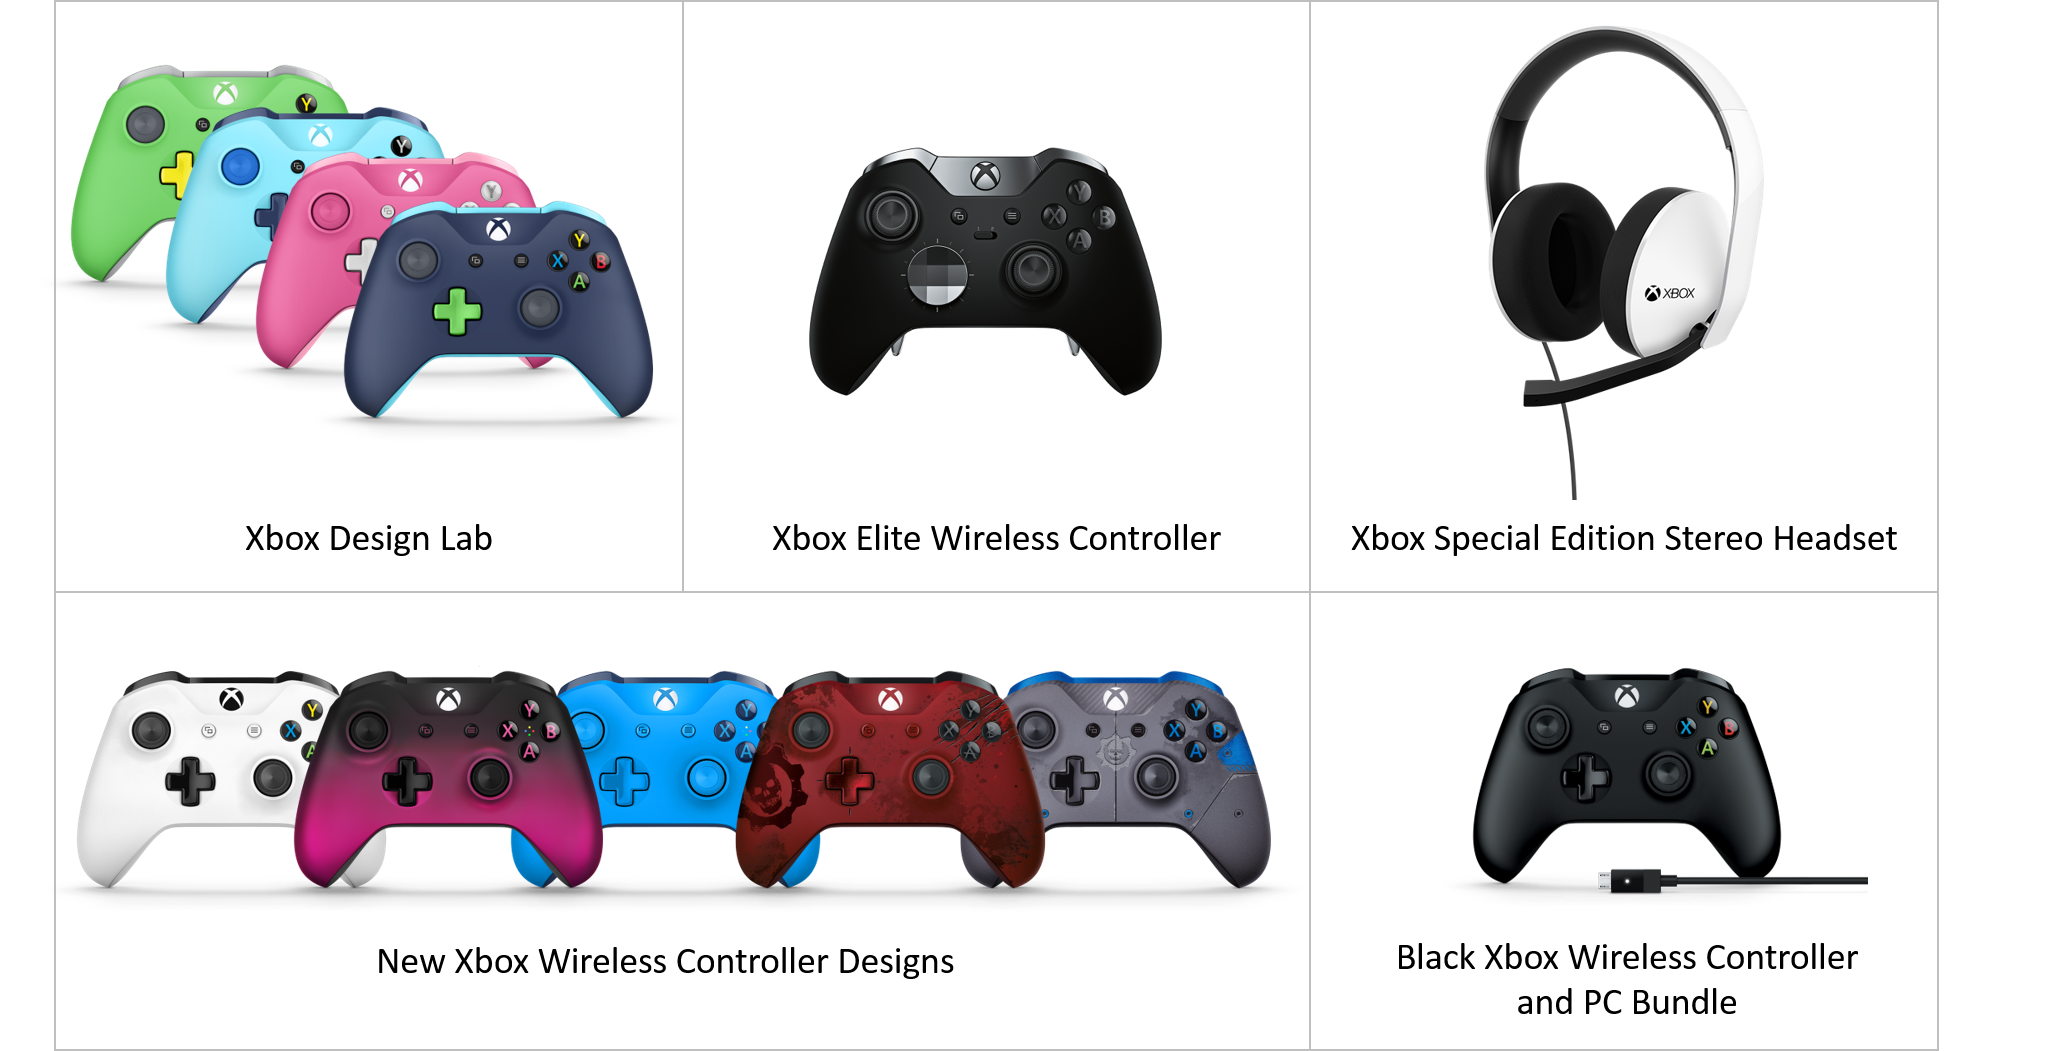 Product shots of various Xbox accessories